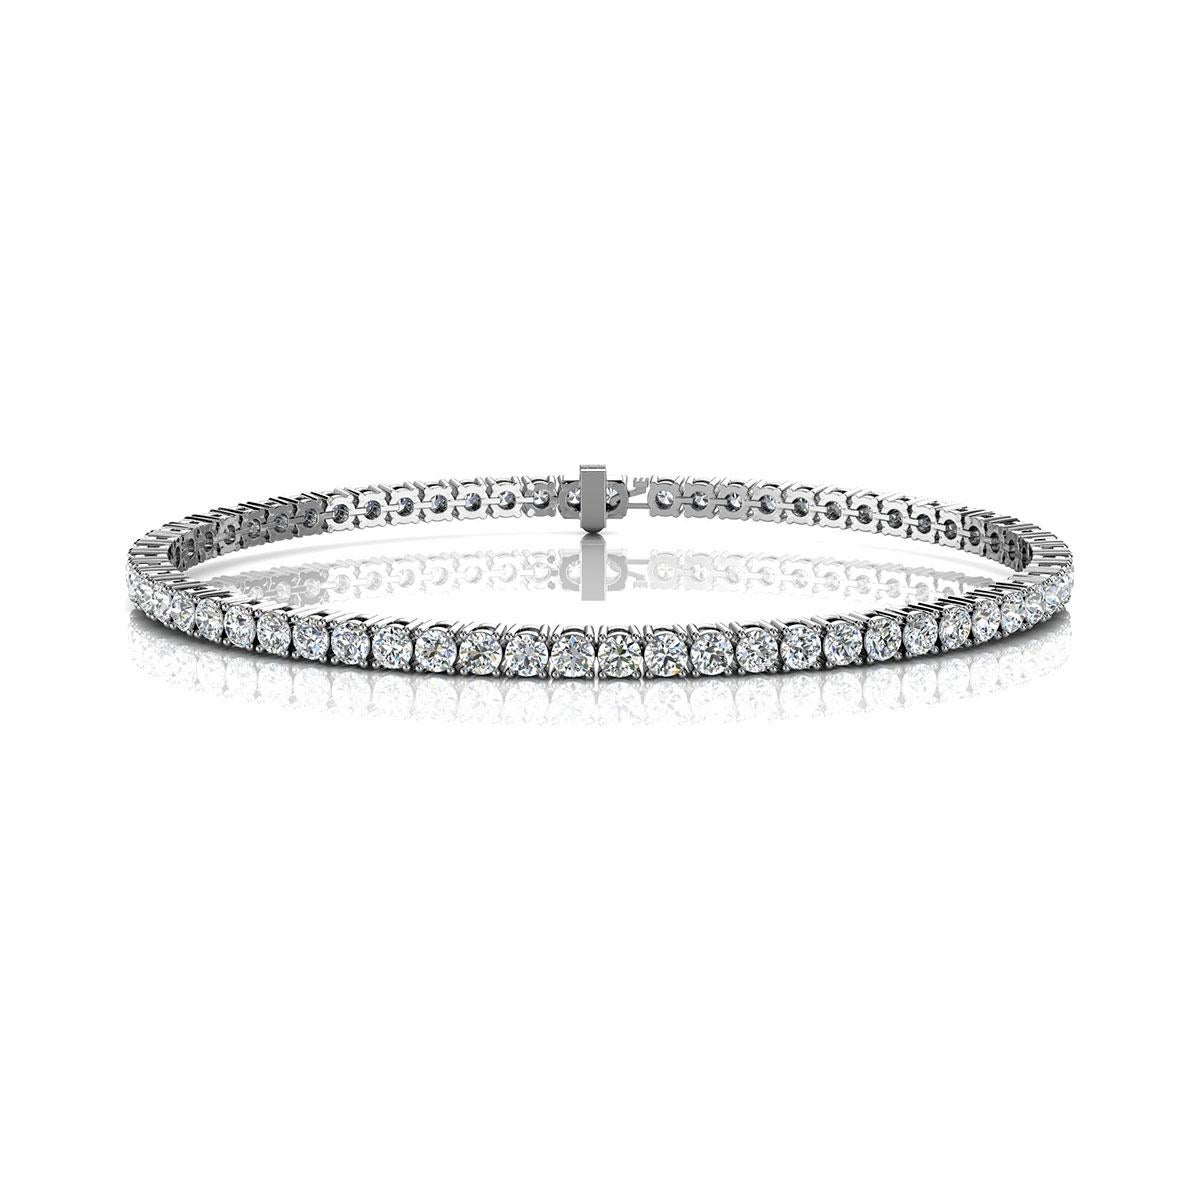 A timeless four prongs diamonds tennis bracelet. Experience the Difference!

Product details: 

Center Gemstone Type: NATURAL DIAMOND
Center Gemstone Color: WHITE
Center Gemstone Shape: ROUND
Center Diamond Carat Weight: 3
Metal: Platinum
Metal